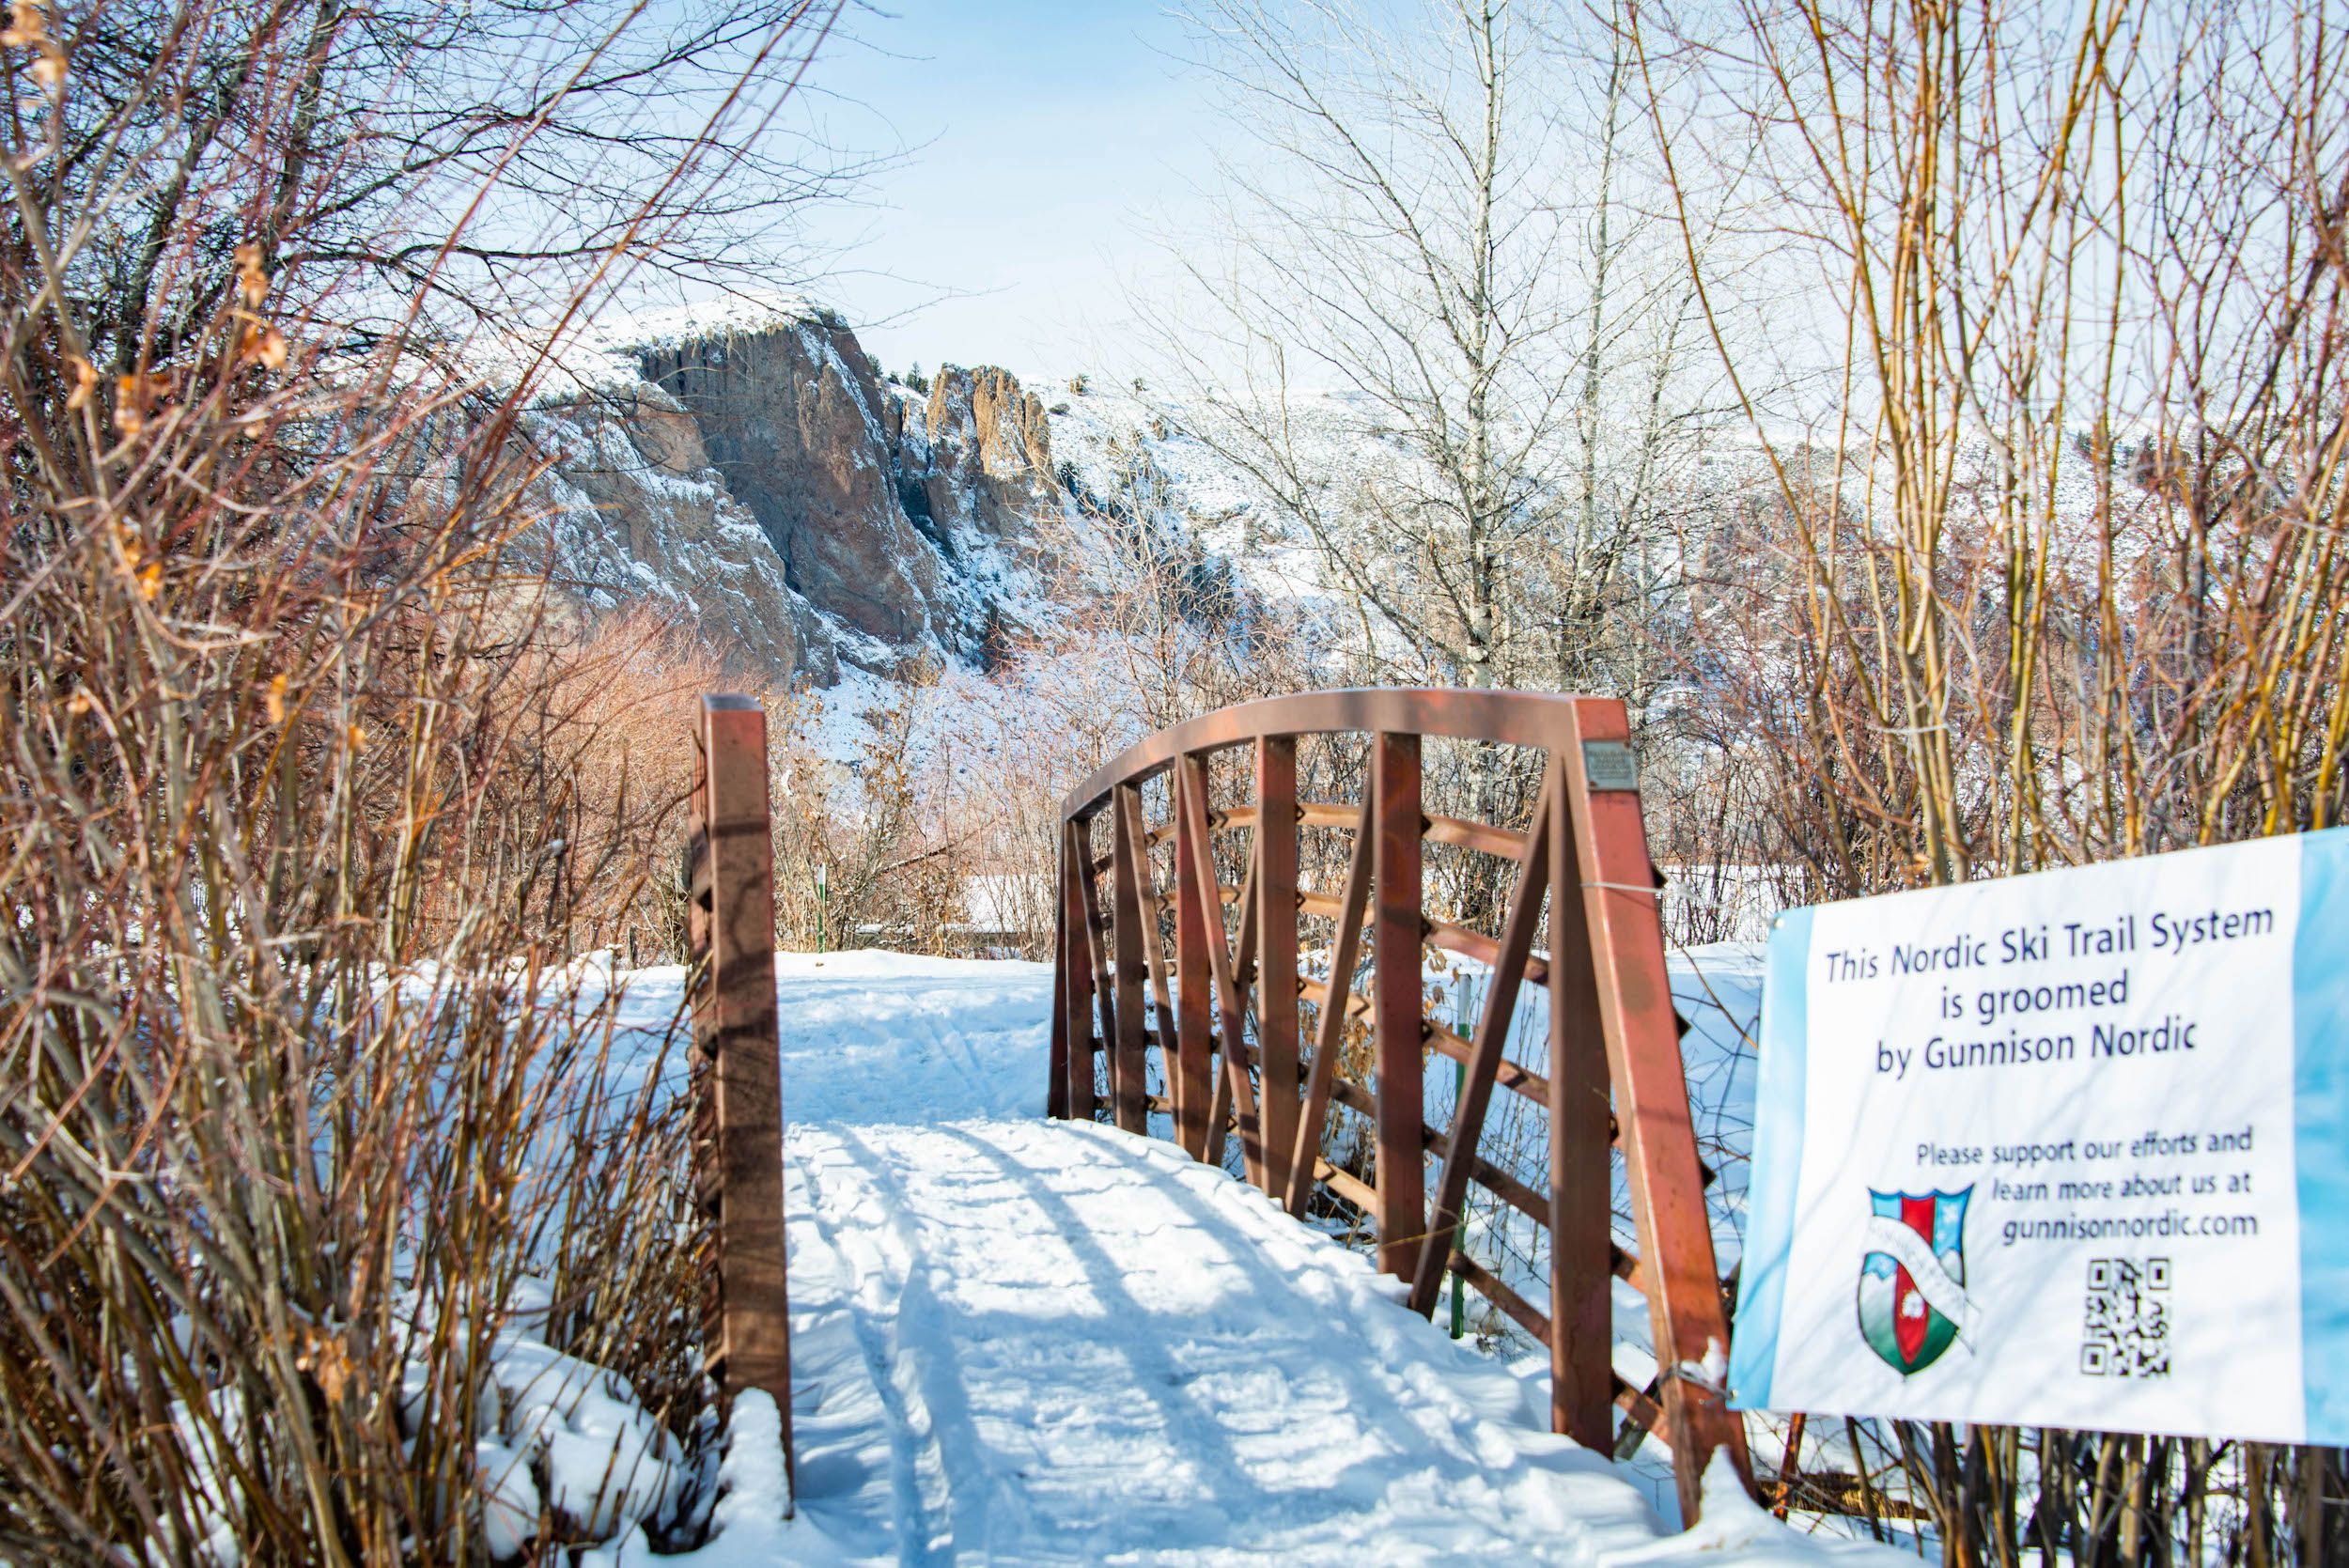 a bridge with a sign in front of it that says "This Nordic Ski Trail System is groomed by Gunnison Nordic." Land stewardship